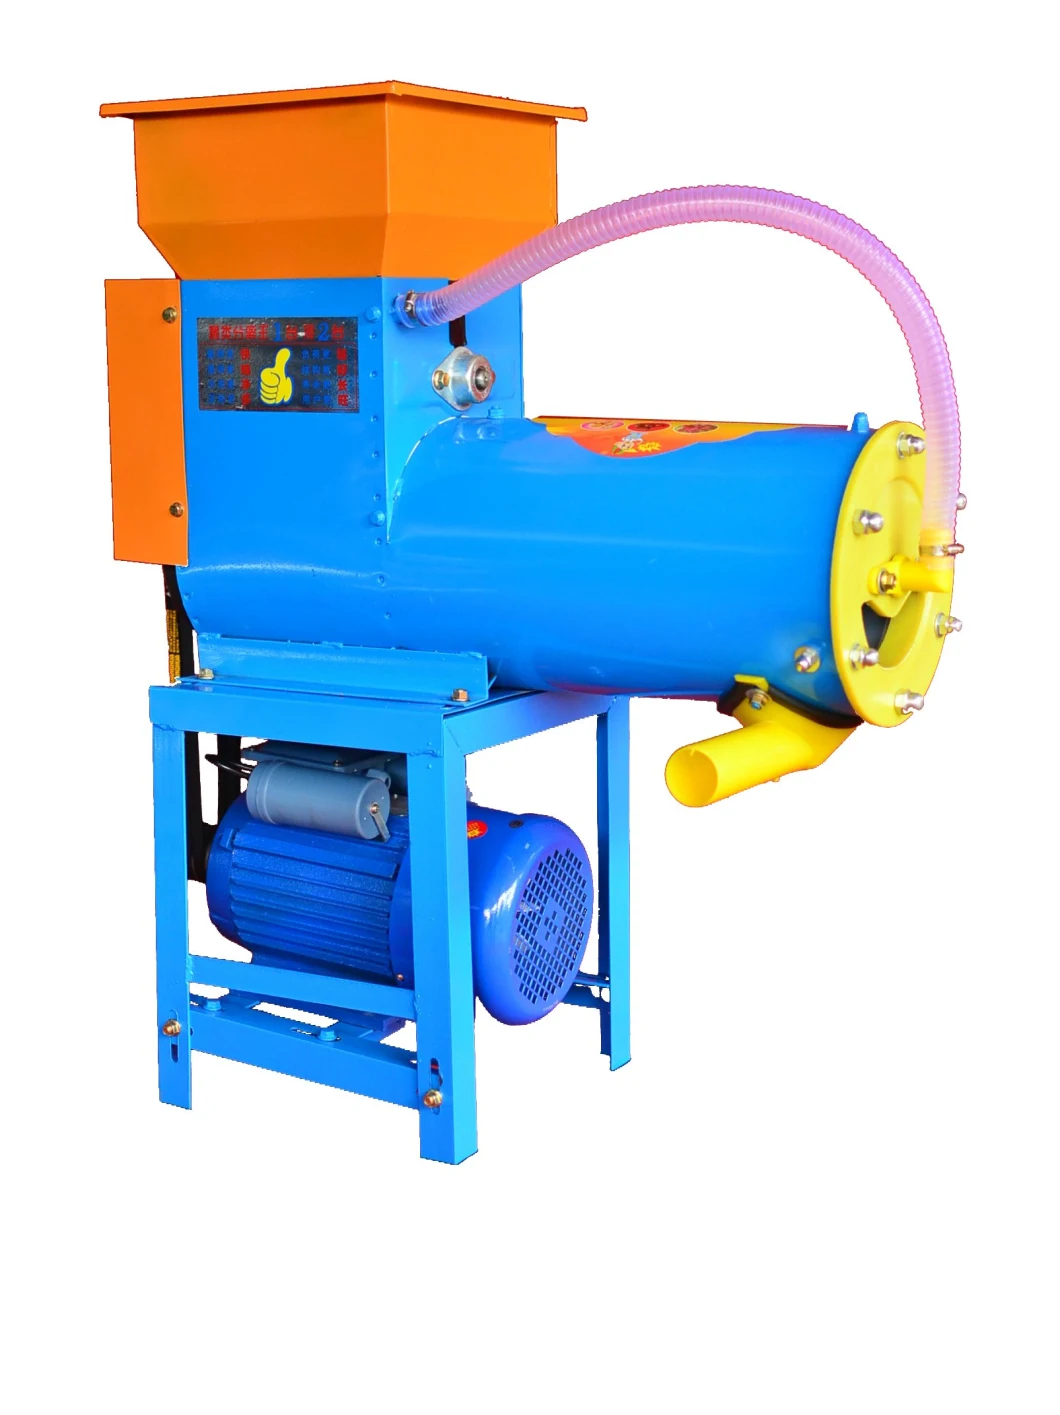 Best Selling Food Processing Machine Potato Starch Separator or Starch Separator